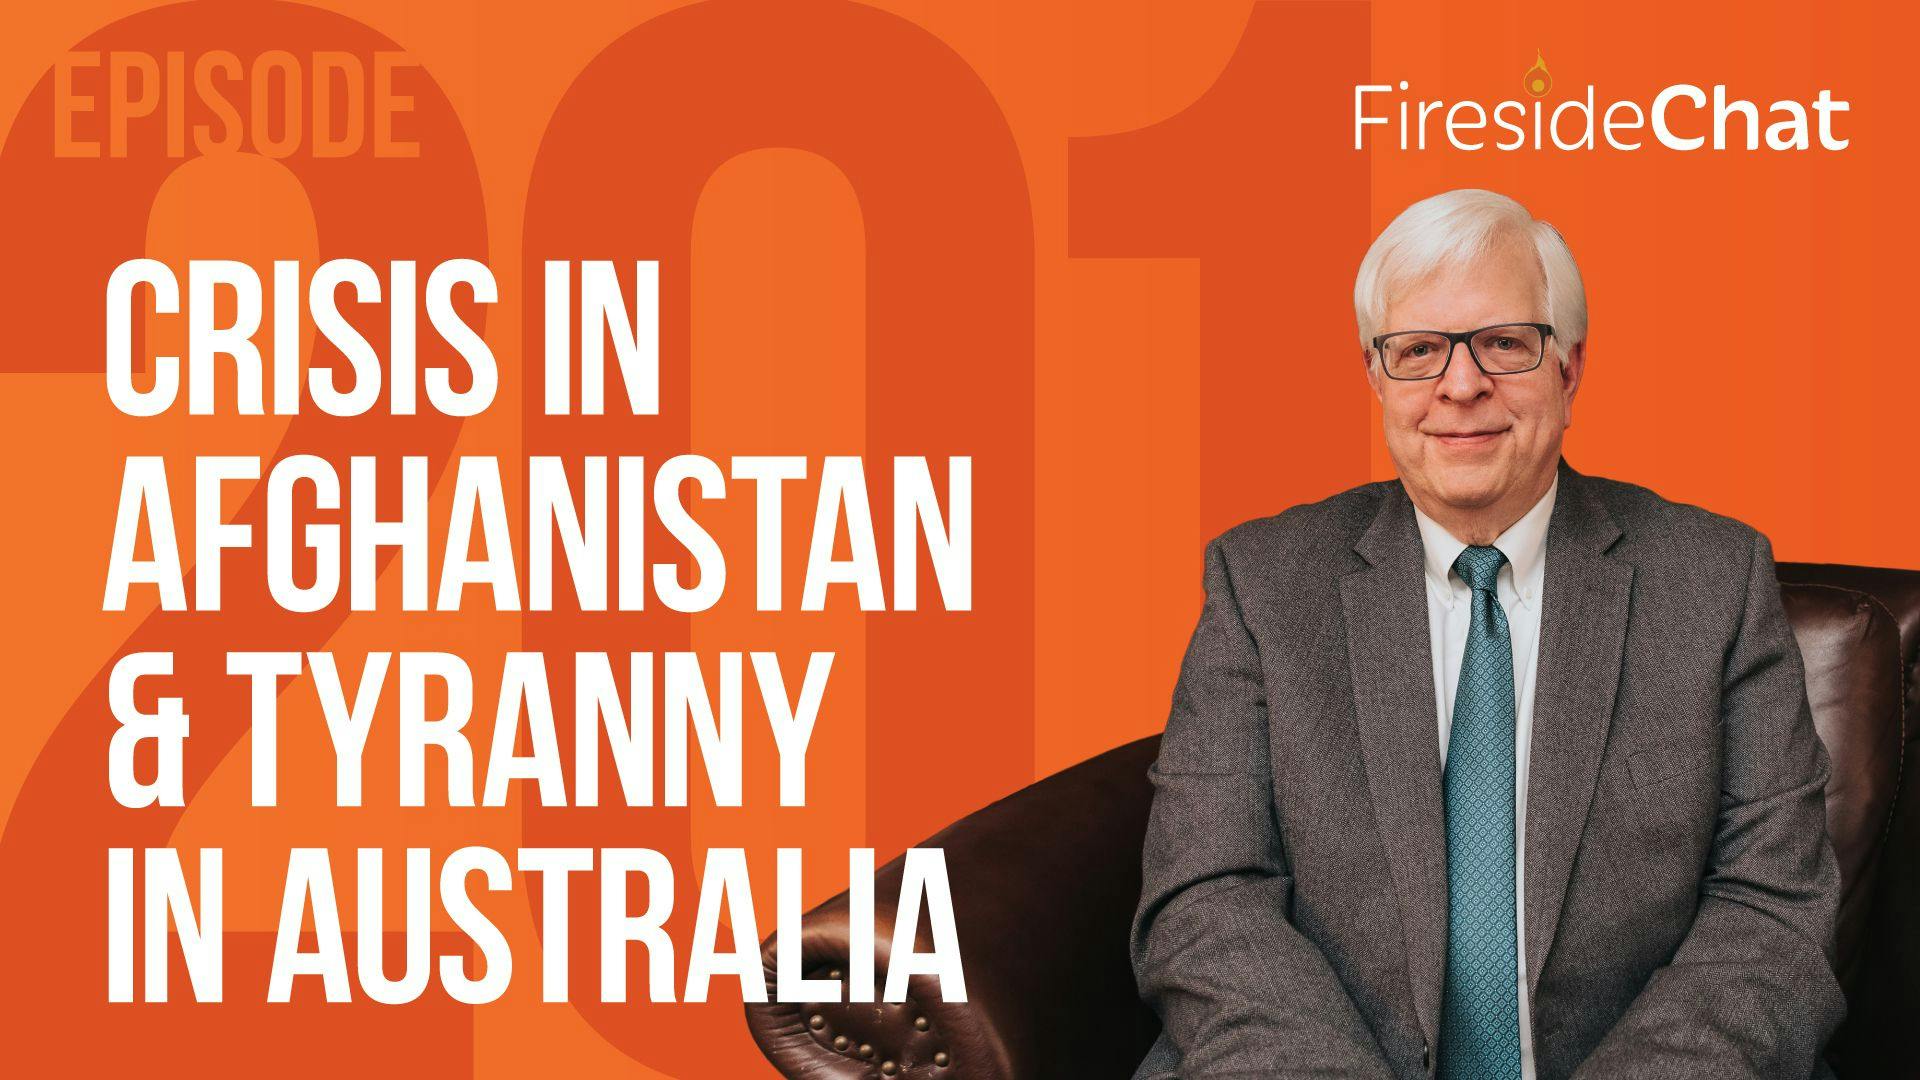 Ep. 201 — Crisis in Afghanistan & Tyranny in Australia